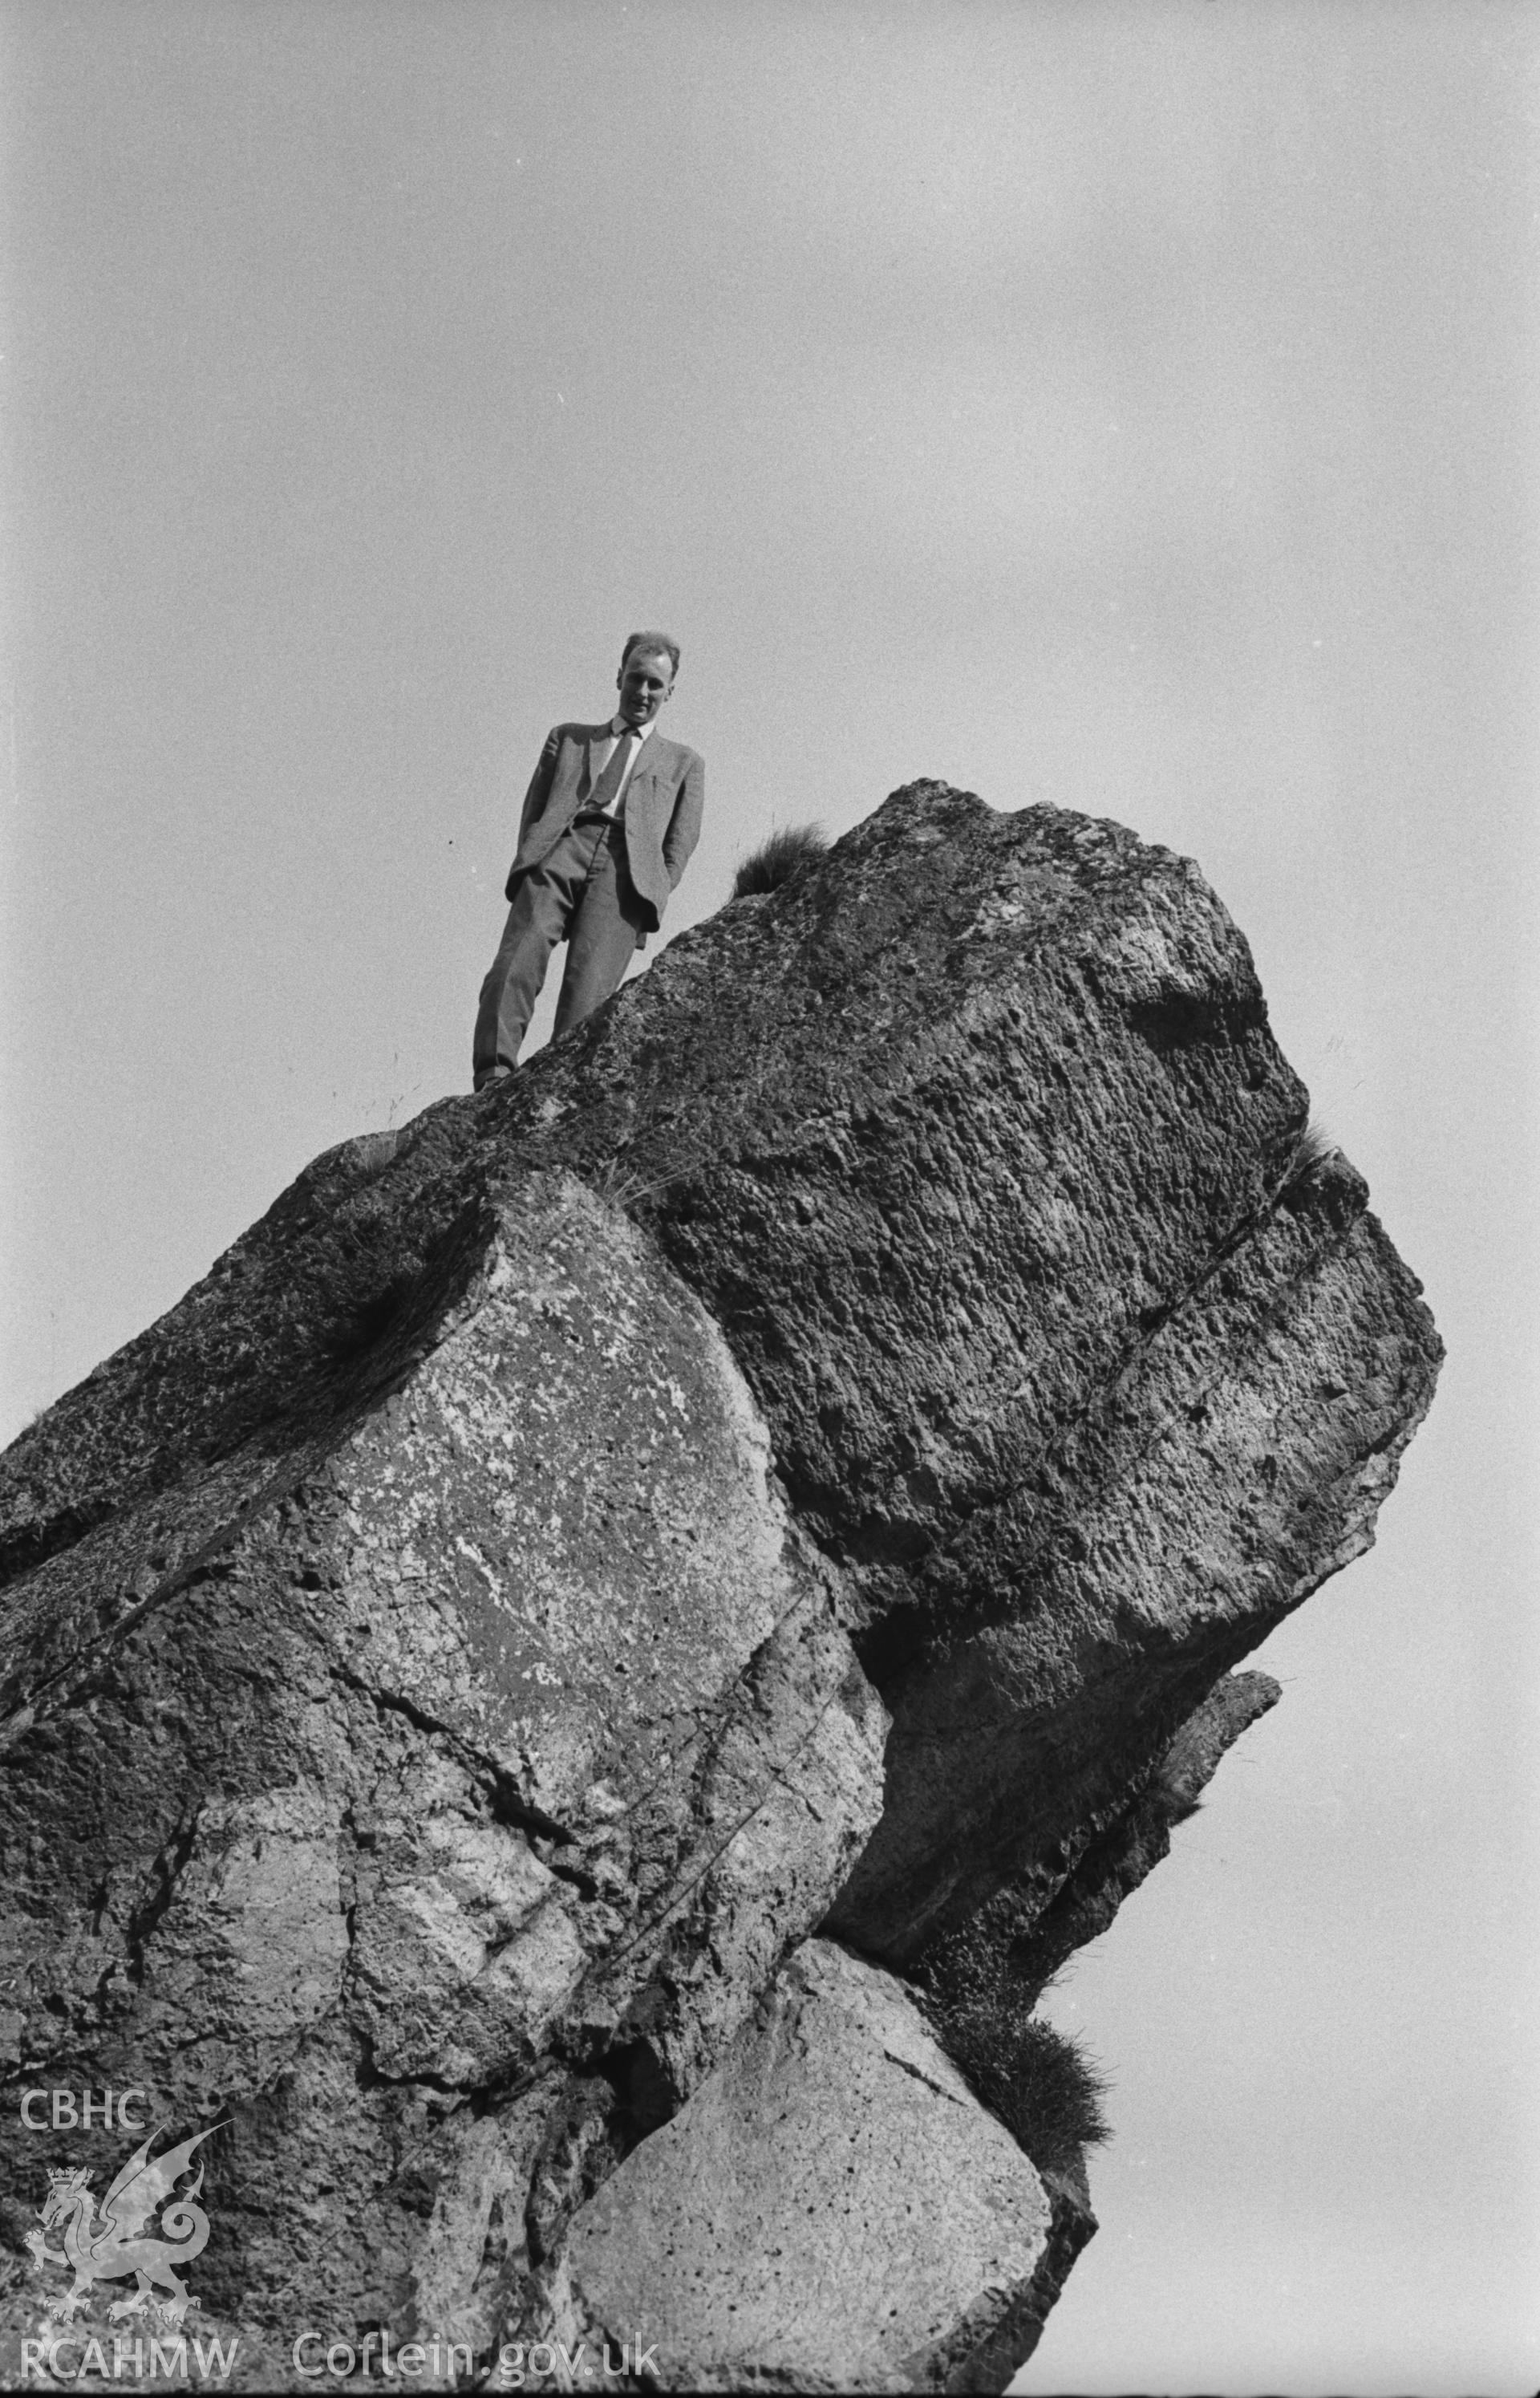 Digital copy of a black and white negative showing man on rock outcrop at Llanrhaeadr-ym-Mochnant. Photographed by Arthur O. Chater in September 1964.